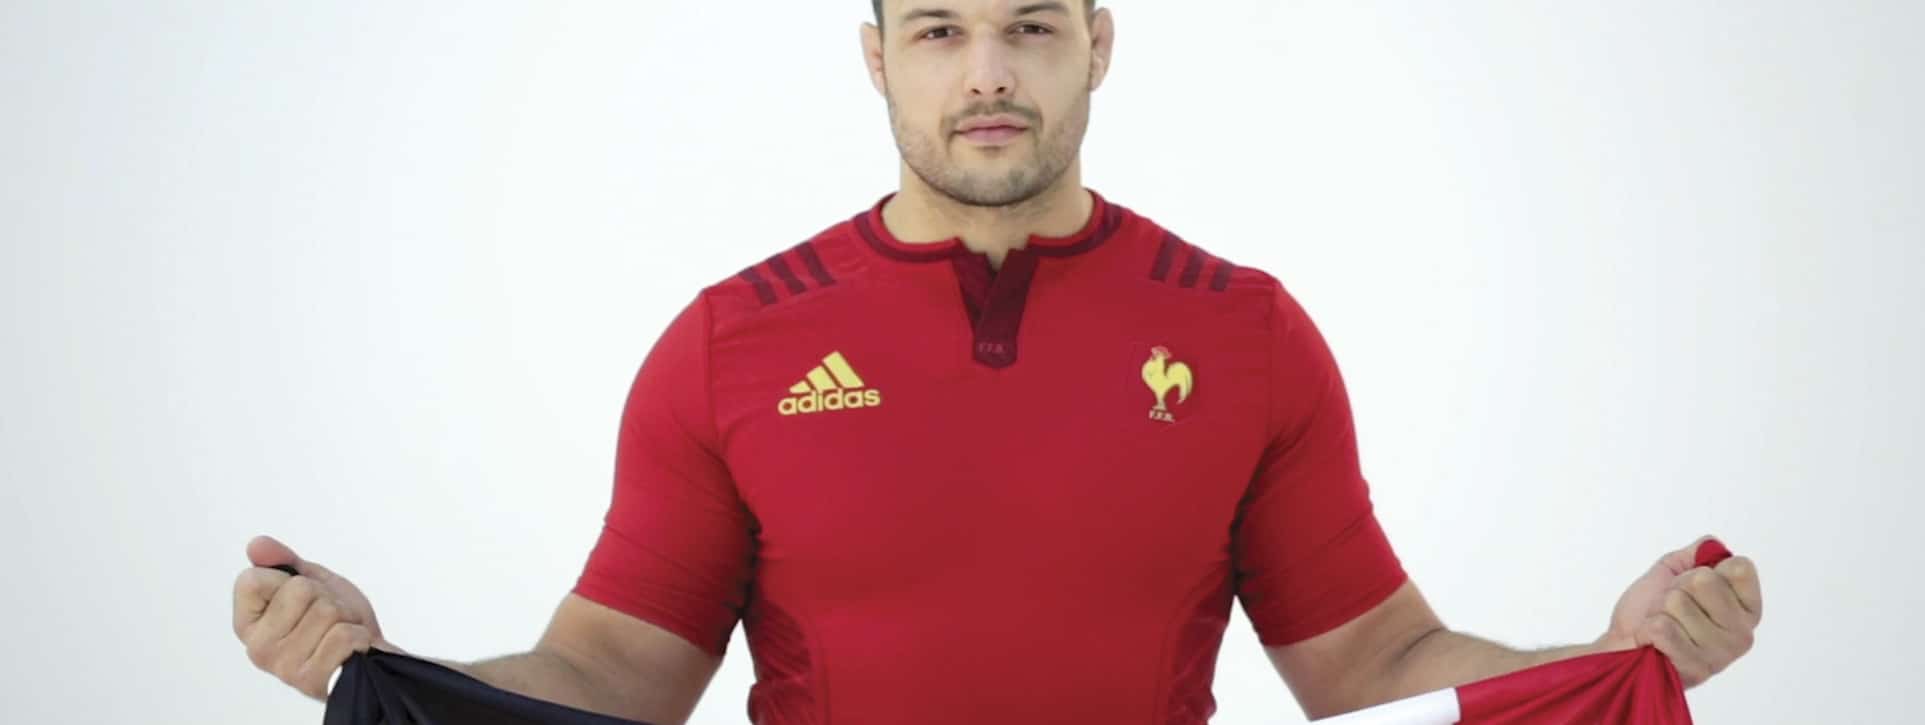 Maillot Equipe de France Rugby - Riot House